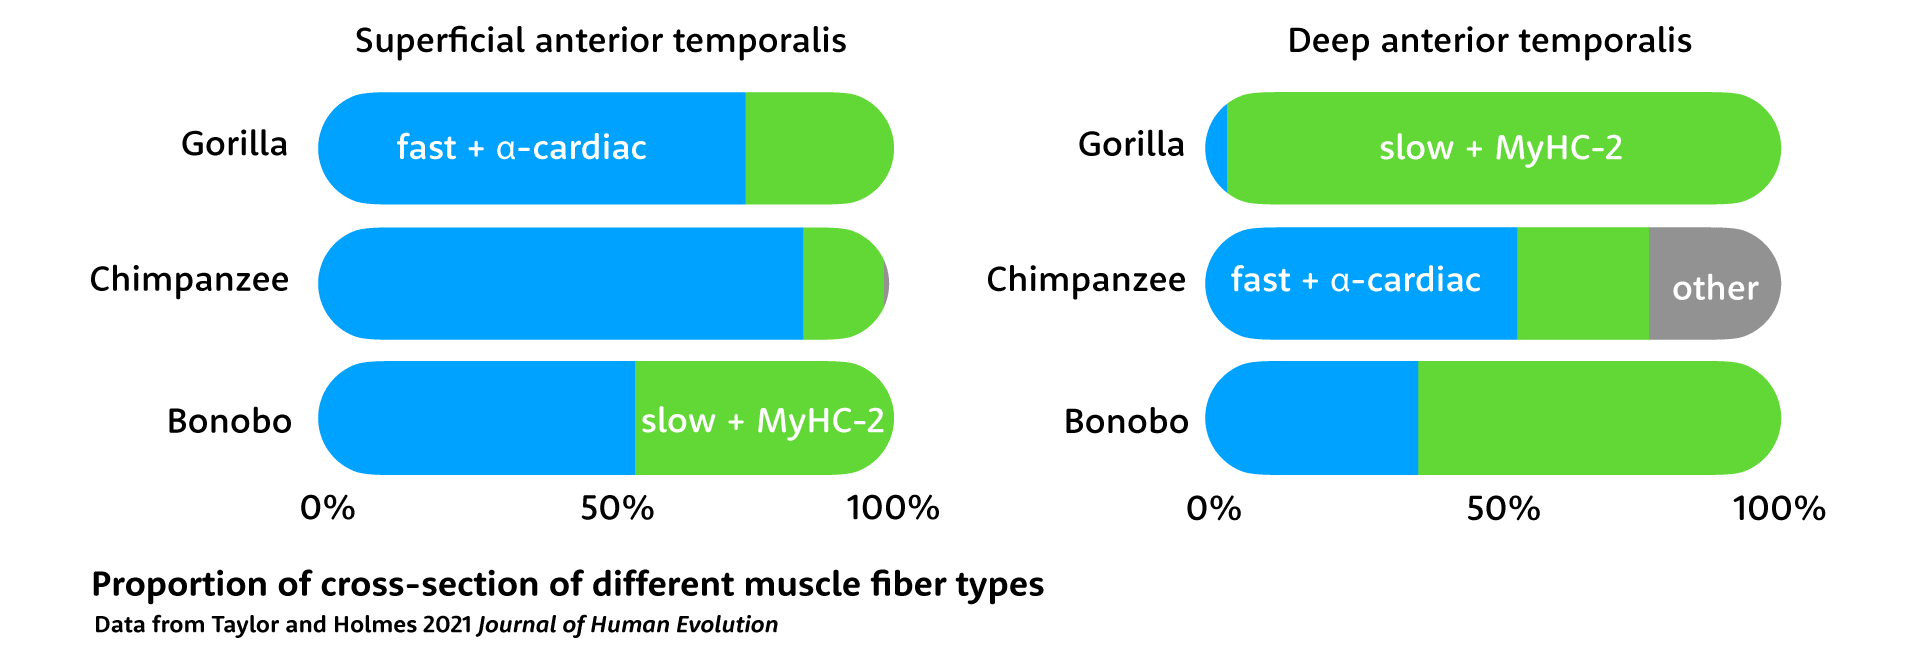 Stacked bar charts showing that gorilla, chimpanzee, and bonobo all have similar fast and alpha cardiac cross sectional area in superficial anterior temporalis, but gorilla has extremely high slow fiber cross section compared to chimpanzee and bonobo in deep anterior temporalis.